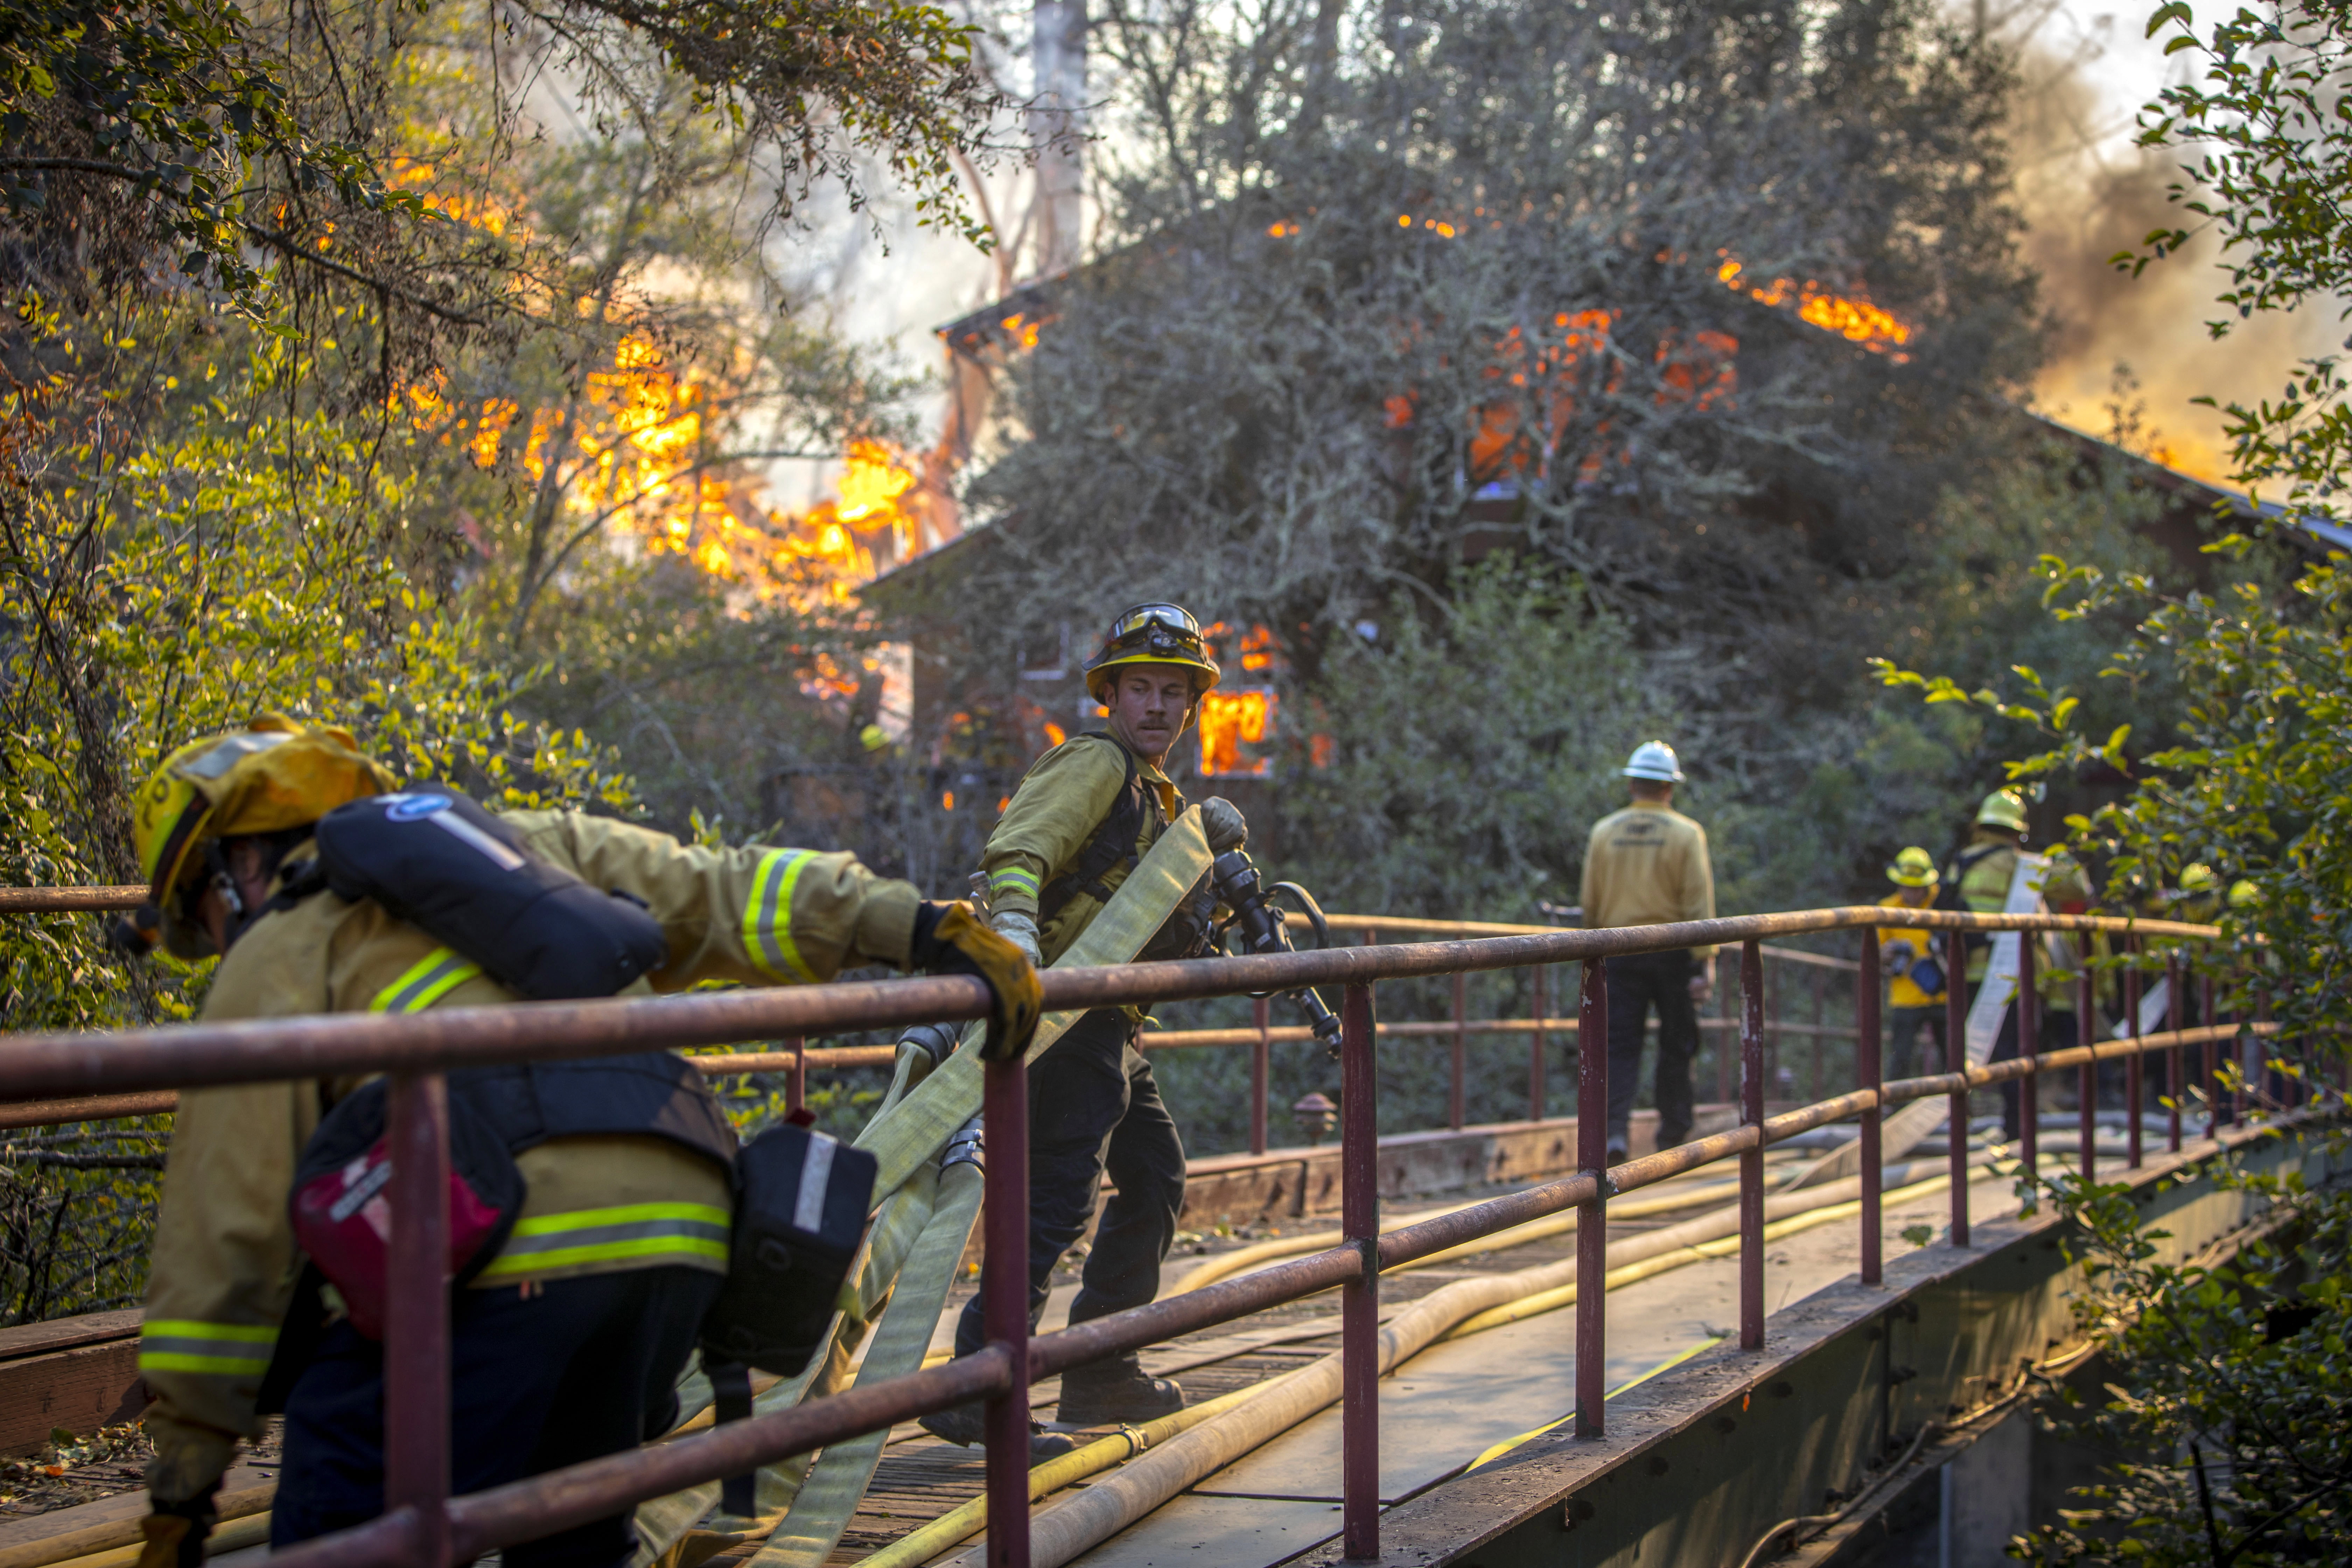 epa07958899 Firefighters navigate across a narrow bridge to battle a house fire along Hwy 128, as spot fires from the Kincade Fire erupt behind the main fire lines as a wind event starts to ramps up for the evening in Sonoma County, California, USA, 29 October 2019. The Kincade Fire has burned 75 thousand acres, destroyed over 90 buildings and is only 15 percent contained.  EPA/PETER DASILVA